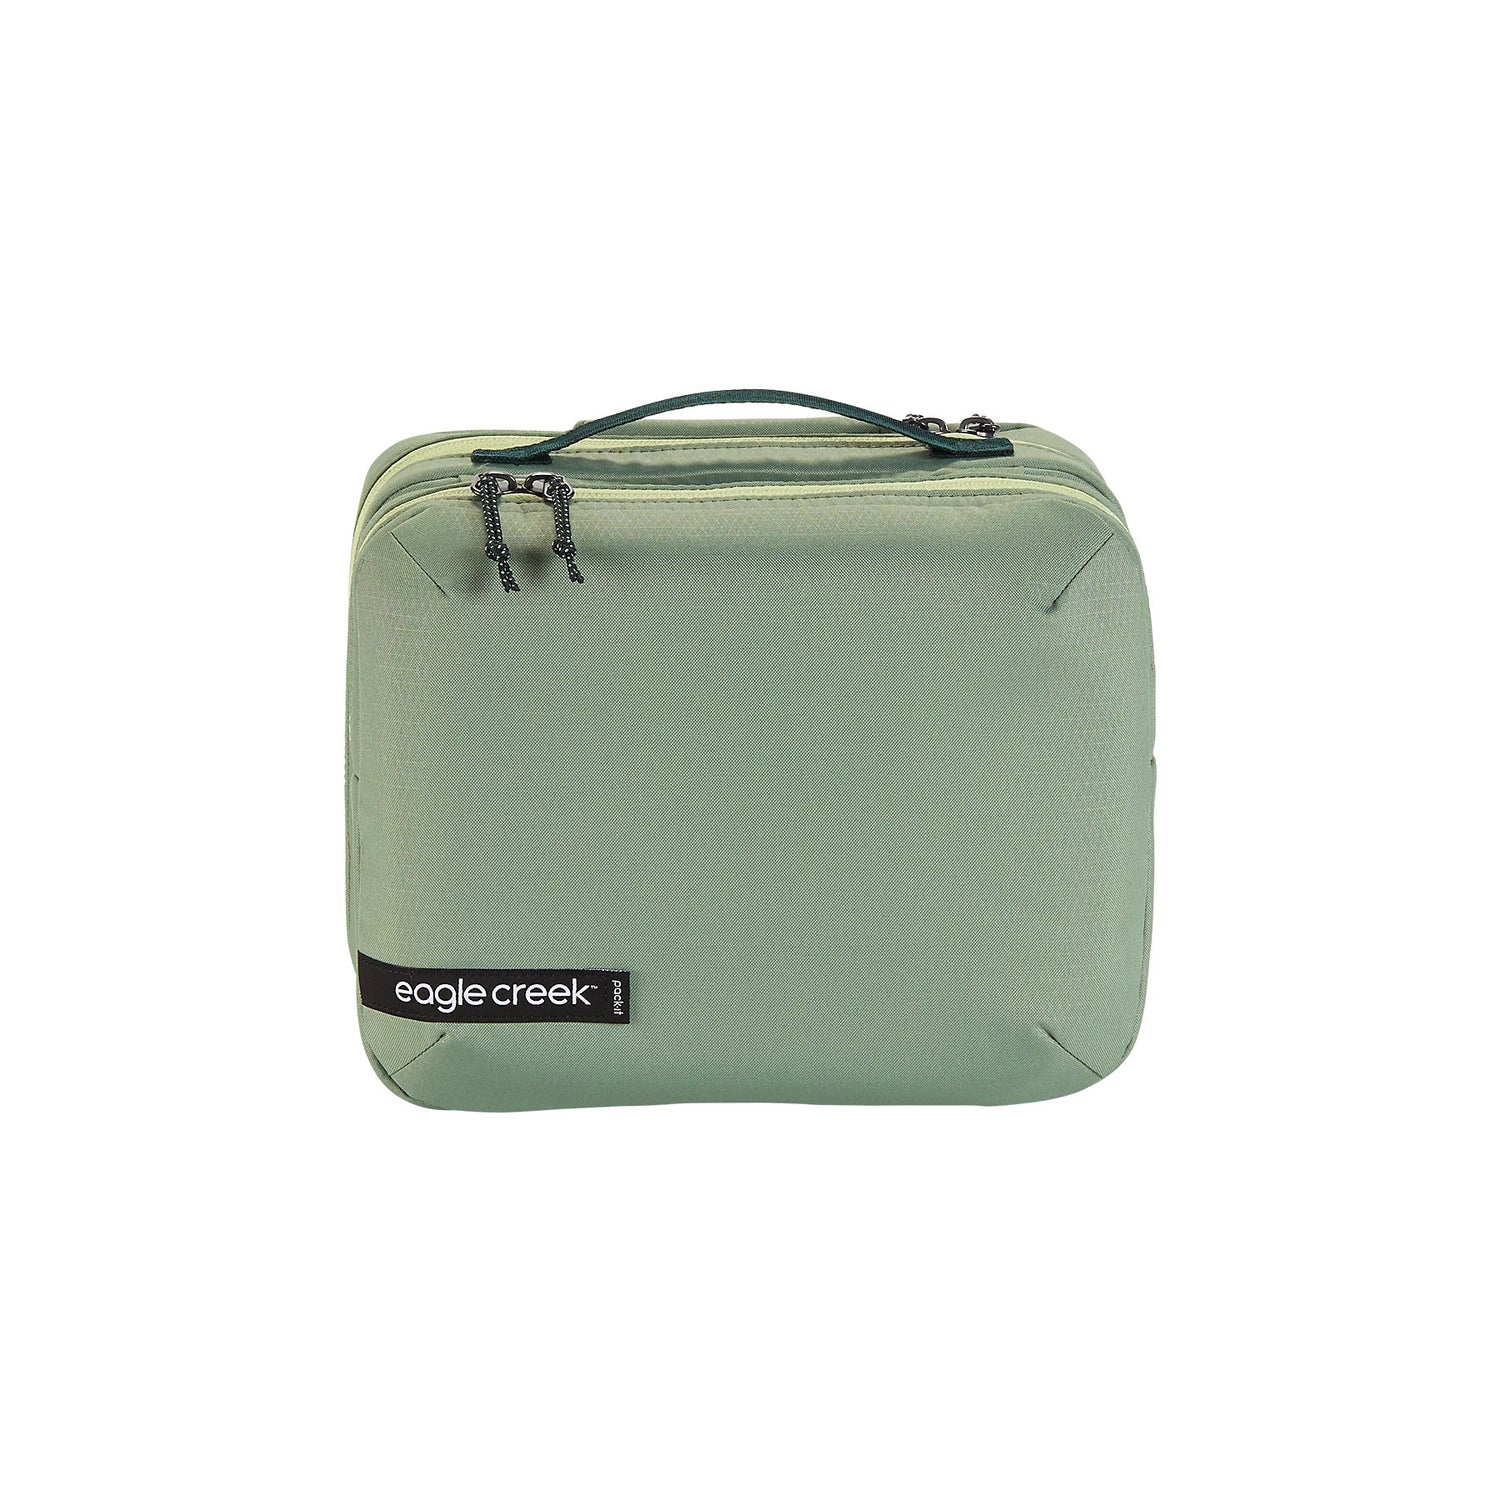 Eagle Creek - Pack-IT Reveal Trifold Toiletry-kit - Mossy Green - 0